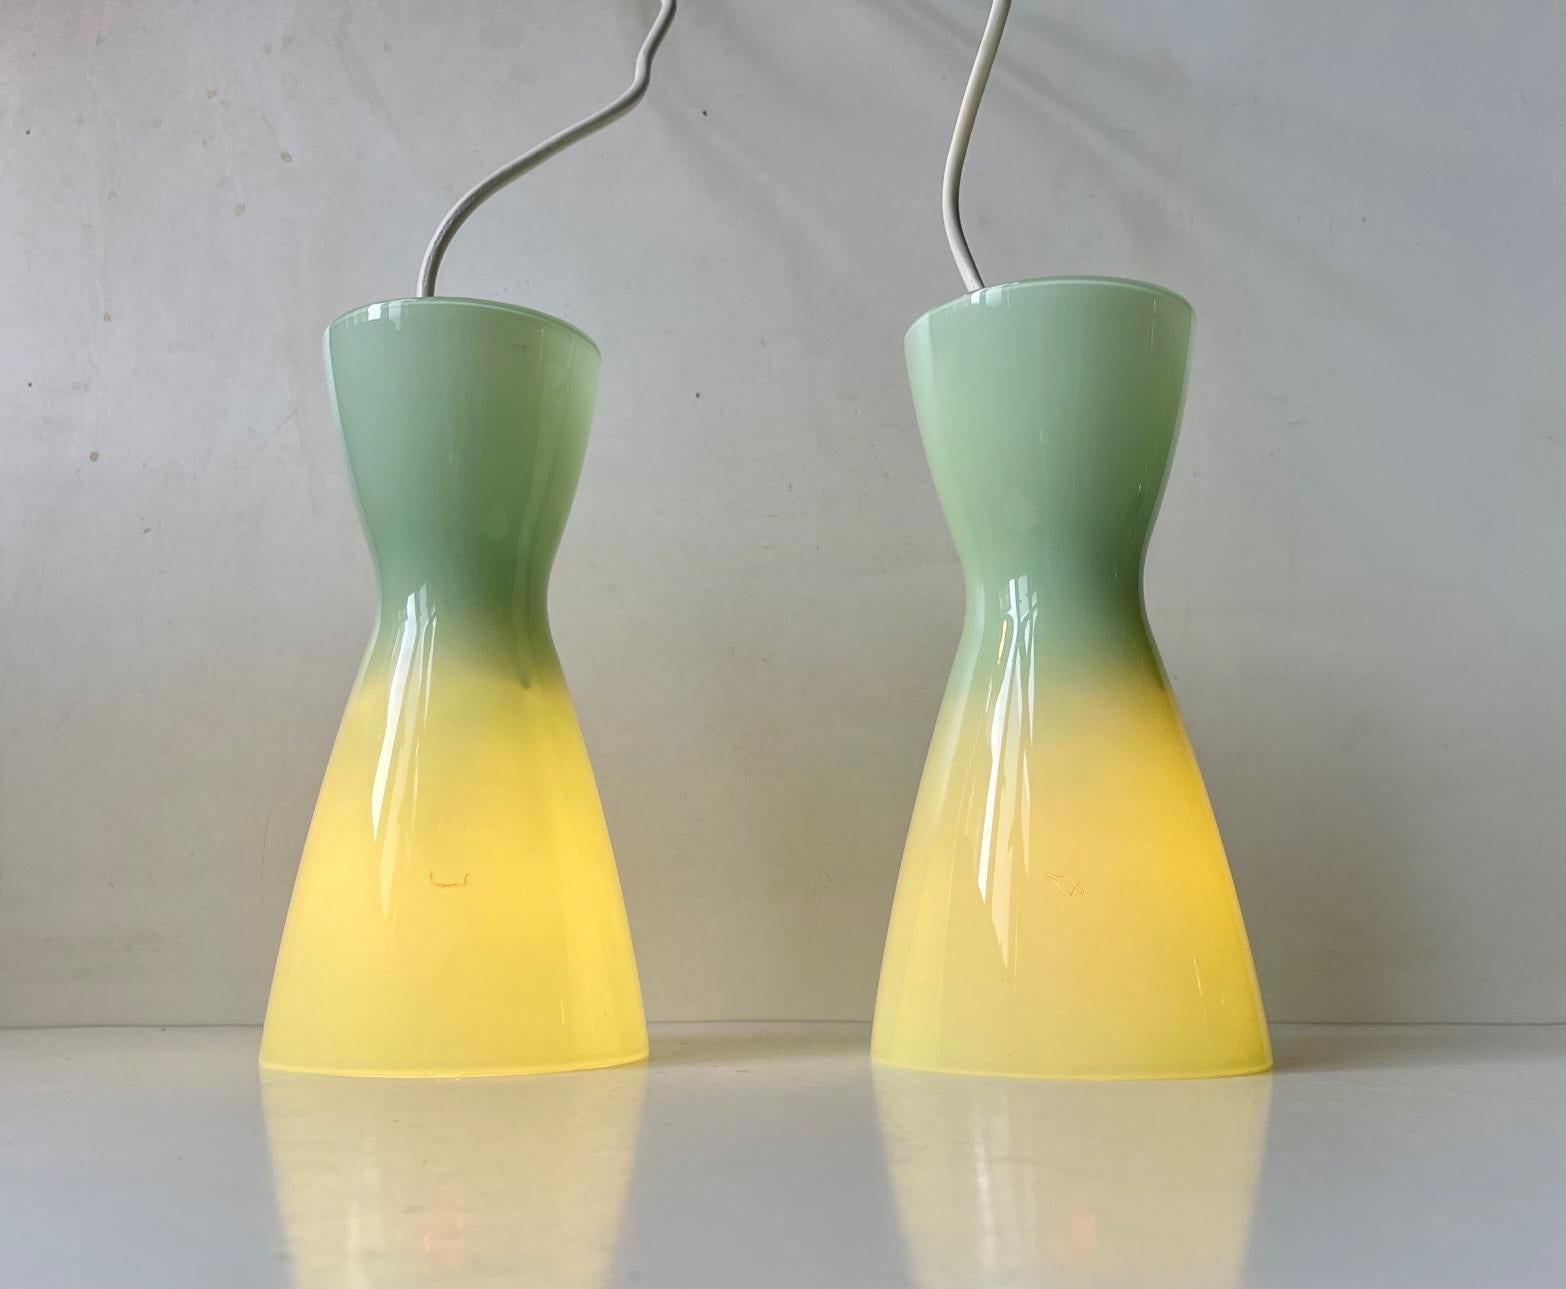 A pair of Jade green hand blown opaline glass pendant lights designed by Peter Svarrer and manufactured by Holmegaard in Denmark during 1990s. Suitable as kitchen lighting, entrance, hallway, corner lighting etc. Both with original sticker attached